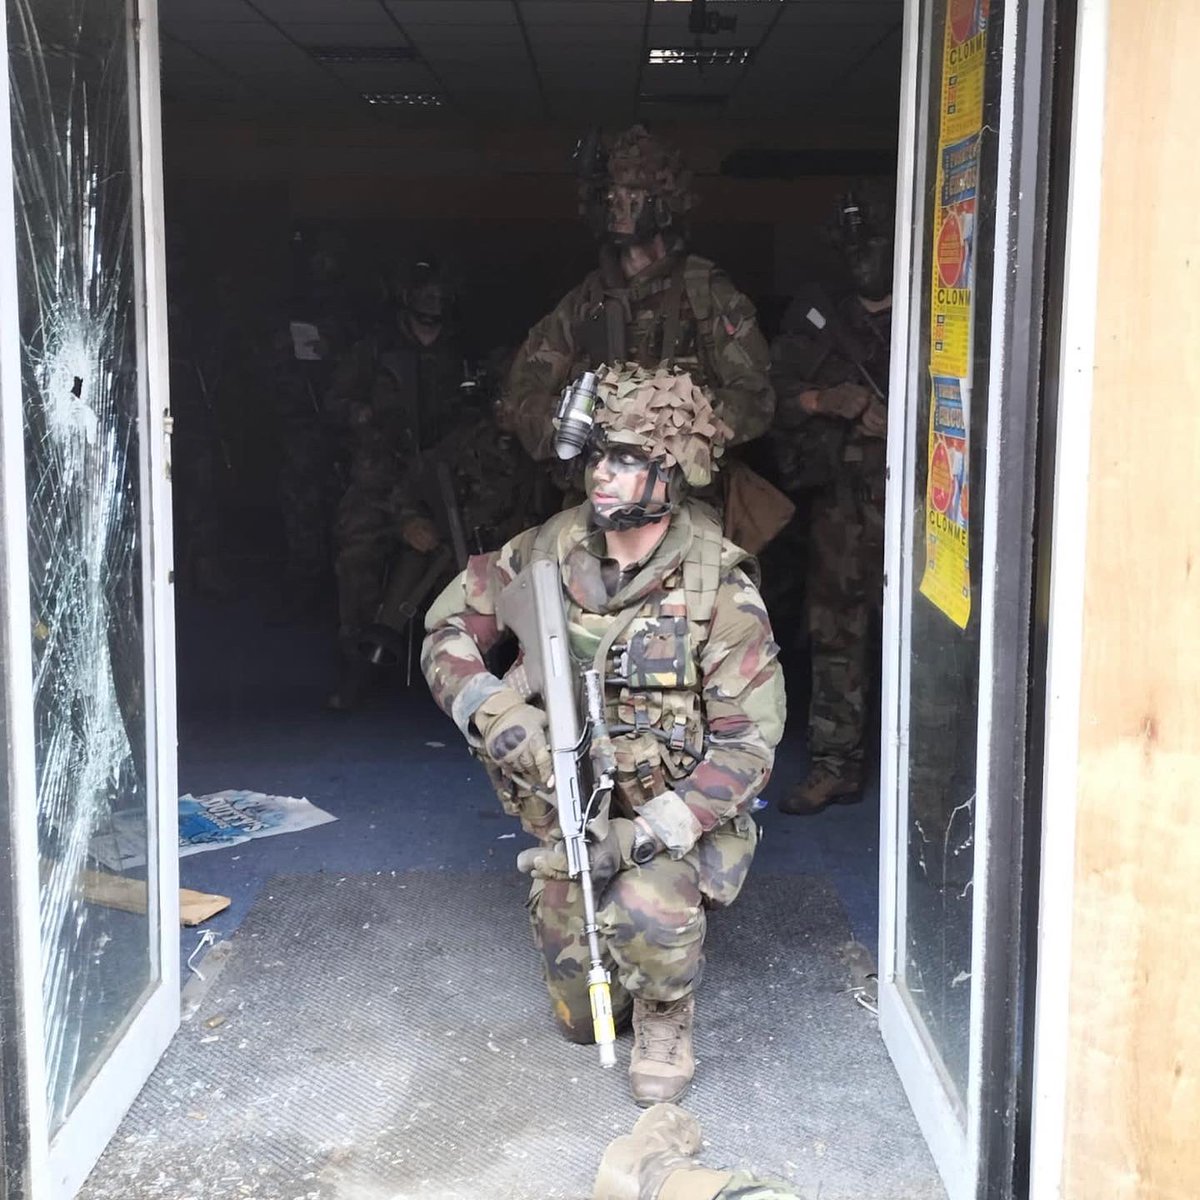 Every operating environment poses complexities perhaps one of the most difficult however is the urban

The 42 IPCC conducted FIBUA training in Clonmel recently to prepare students for challenges they may face conducting Military Ops in Urban Terrain

#infantry #óglaighnahéireann